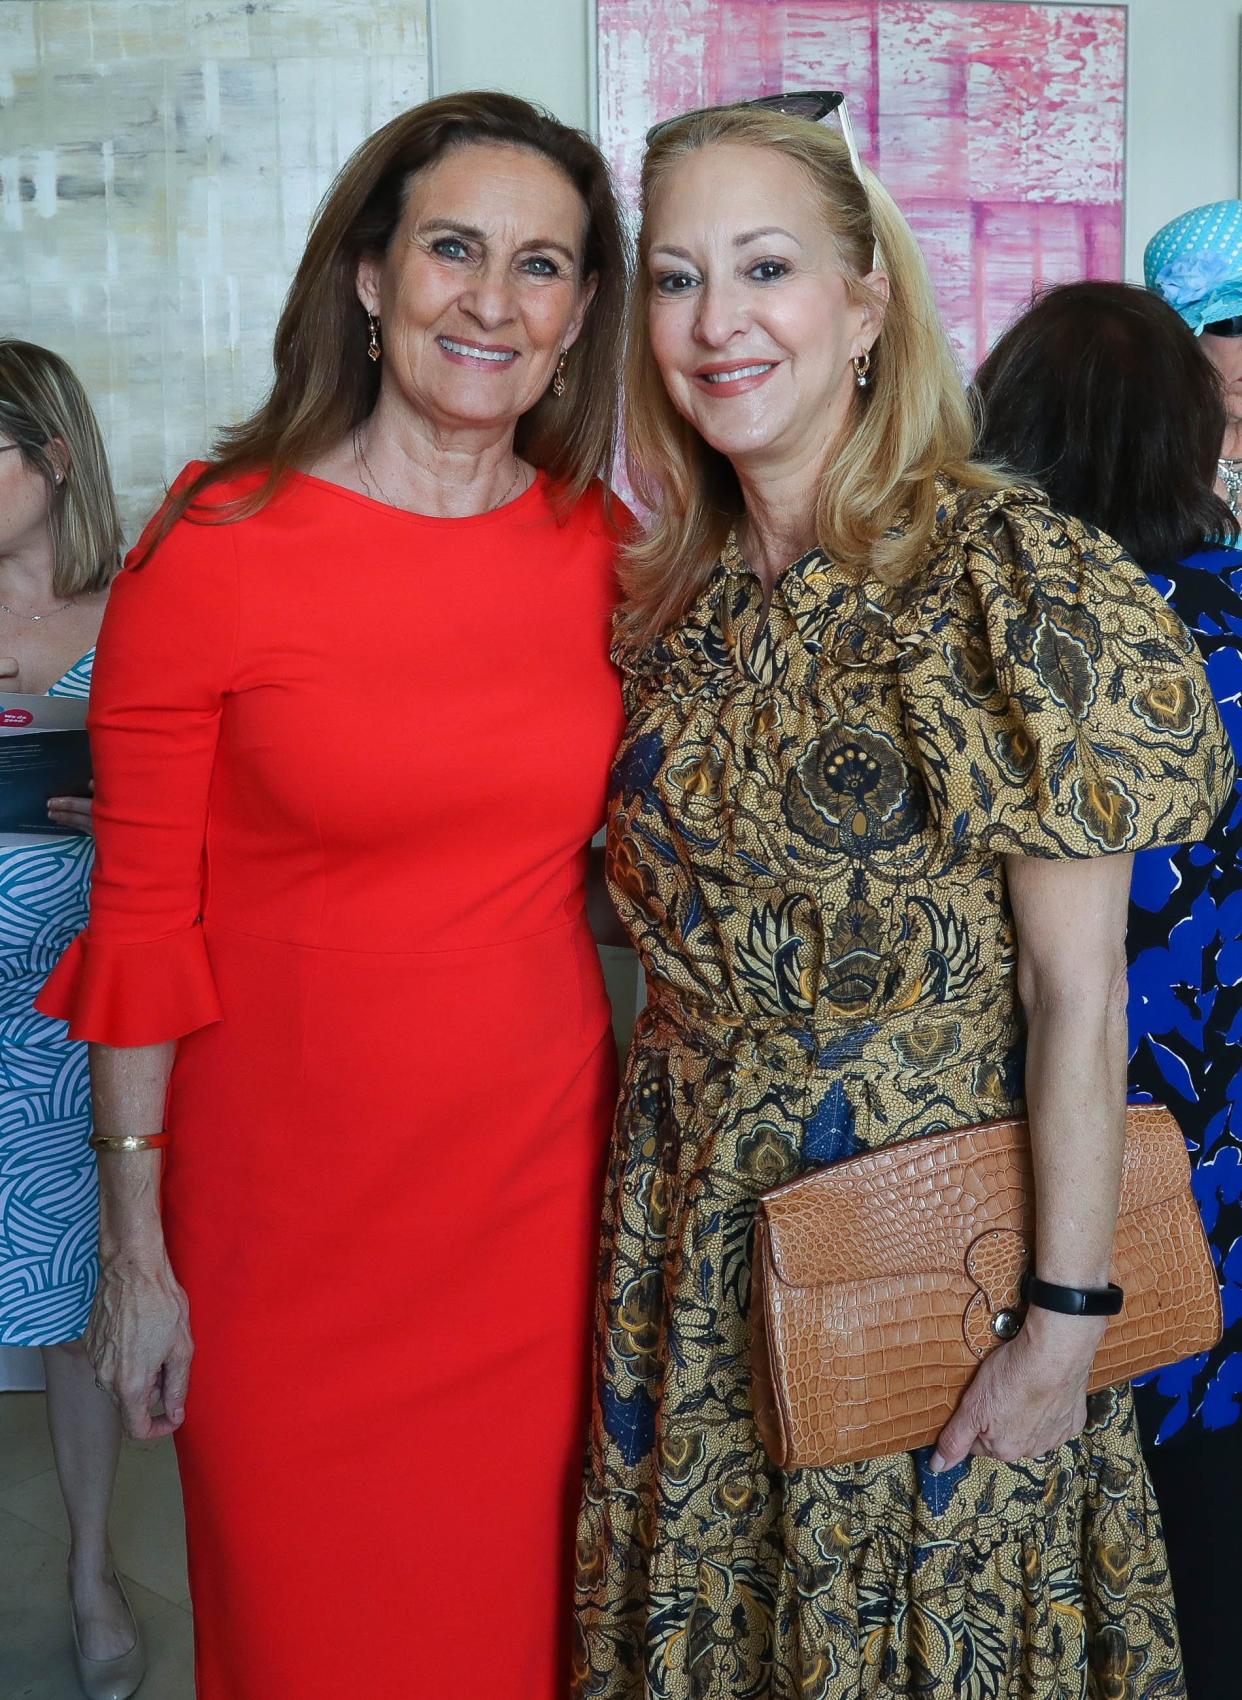 Kathy Leone and Laura Munder at Children’s Home Society of Florida's Spring Luncheon at The Colony Hotel in March 2022. This year's luncheon is set for March 5 at The Colony; Leone is one of the honorary chairwomen.